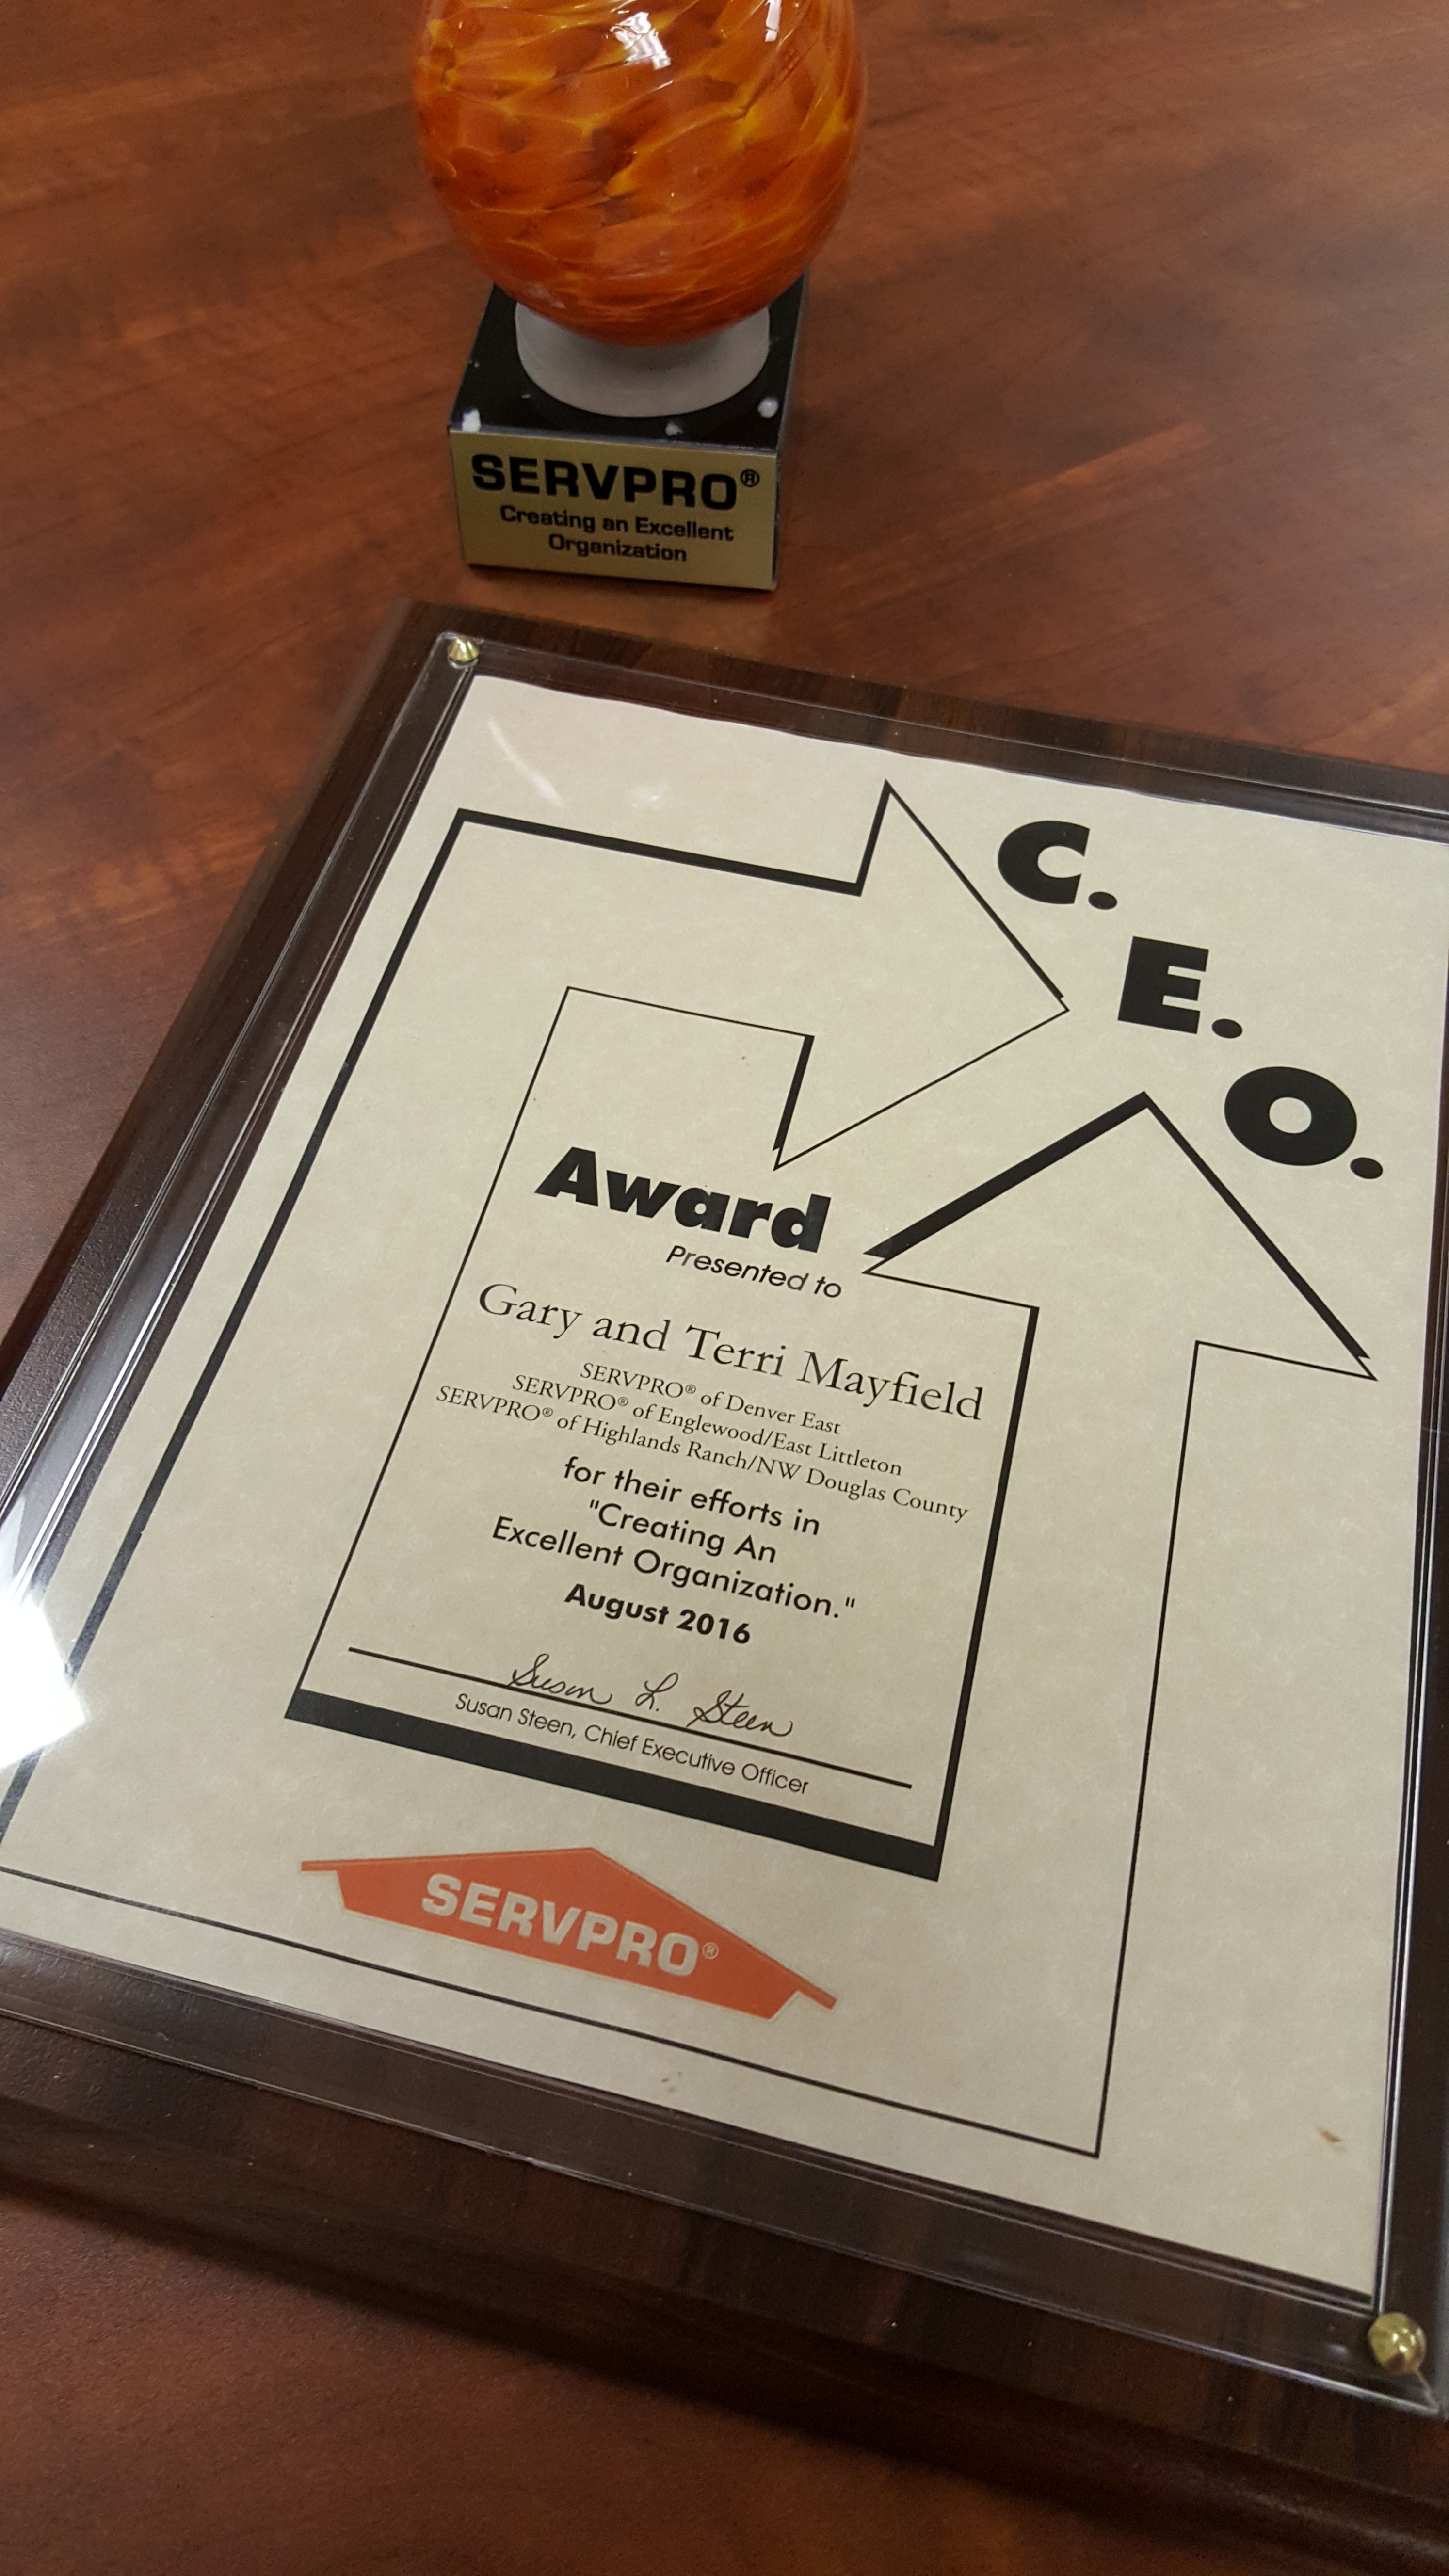 SERVPRO of Denver East received the CEO Award from SERVPRO Industries. This is for our outstanding service in Water and Fire Damage Restoration.